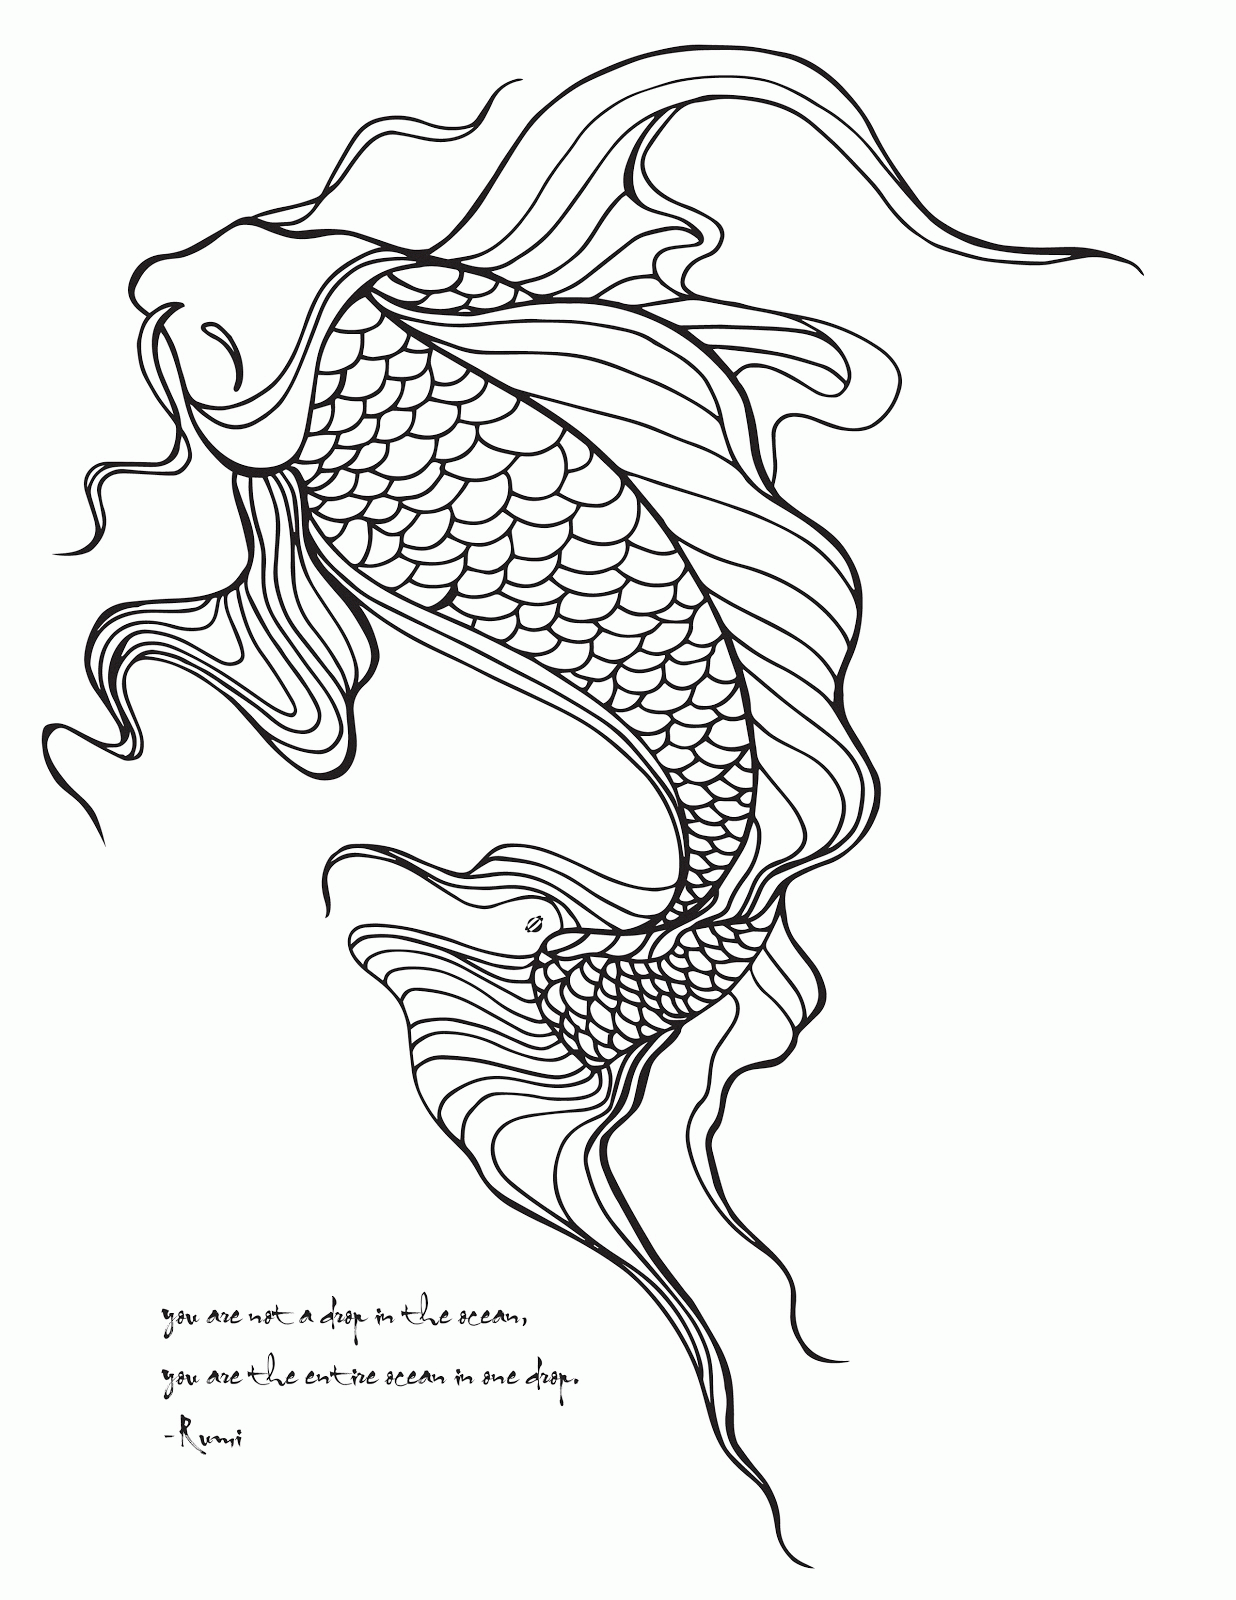 Printable Koi Fish Coloring Pages | Cooloring.com